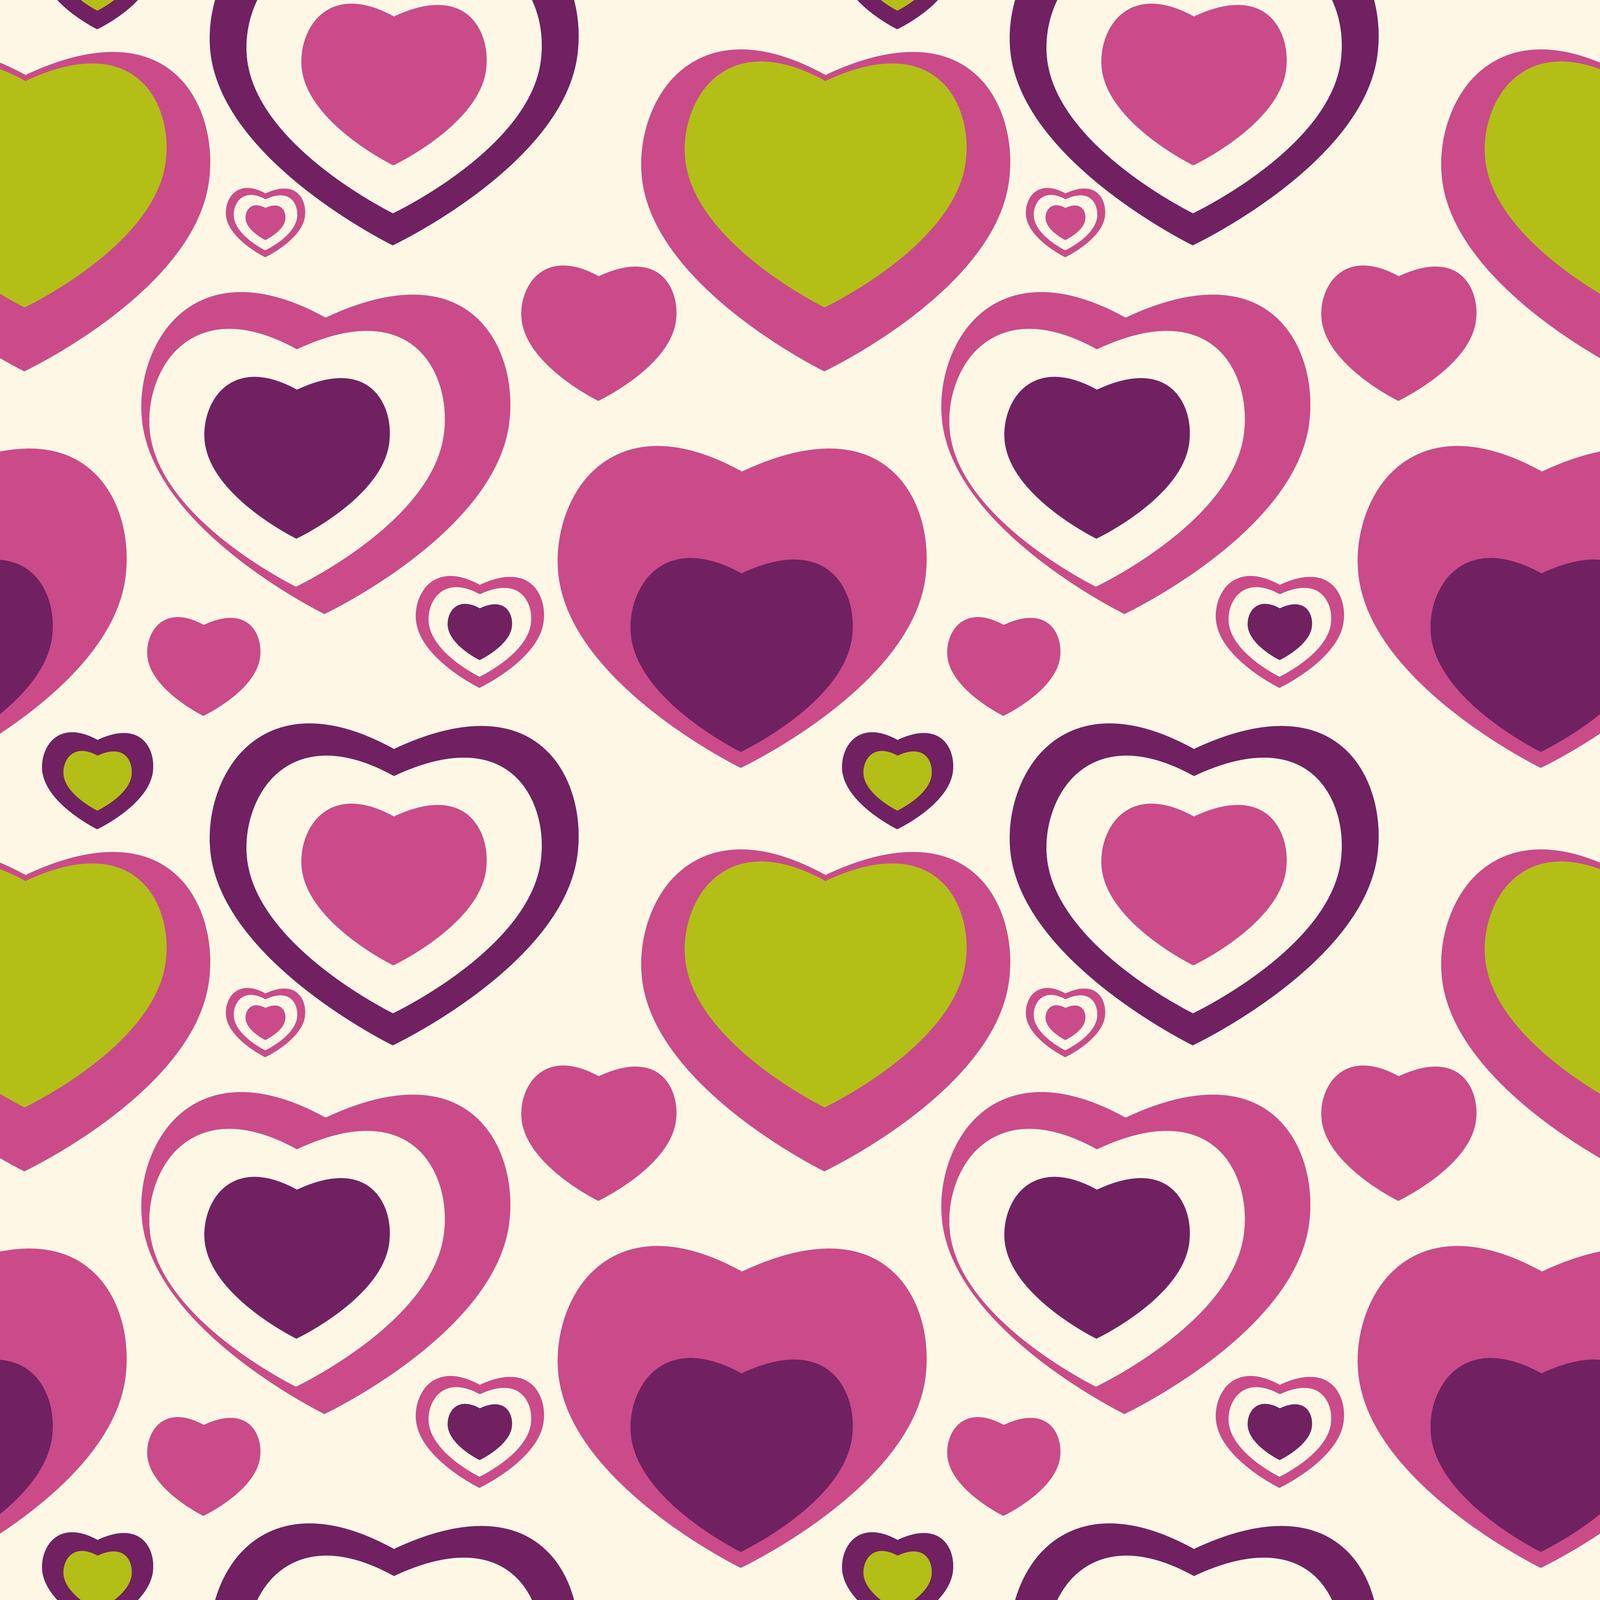 Heart Love Seamless Pattern Background Vector Illustration by yganko